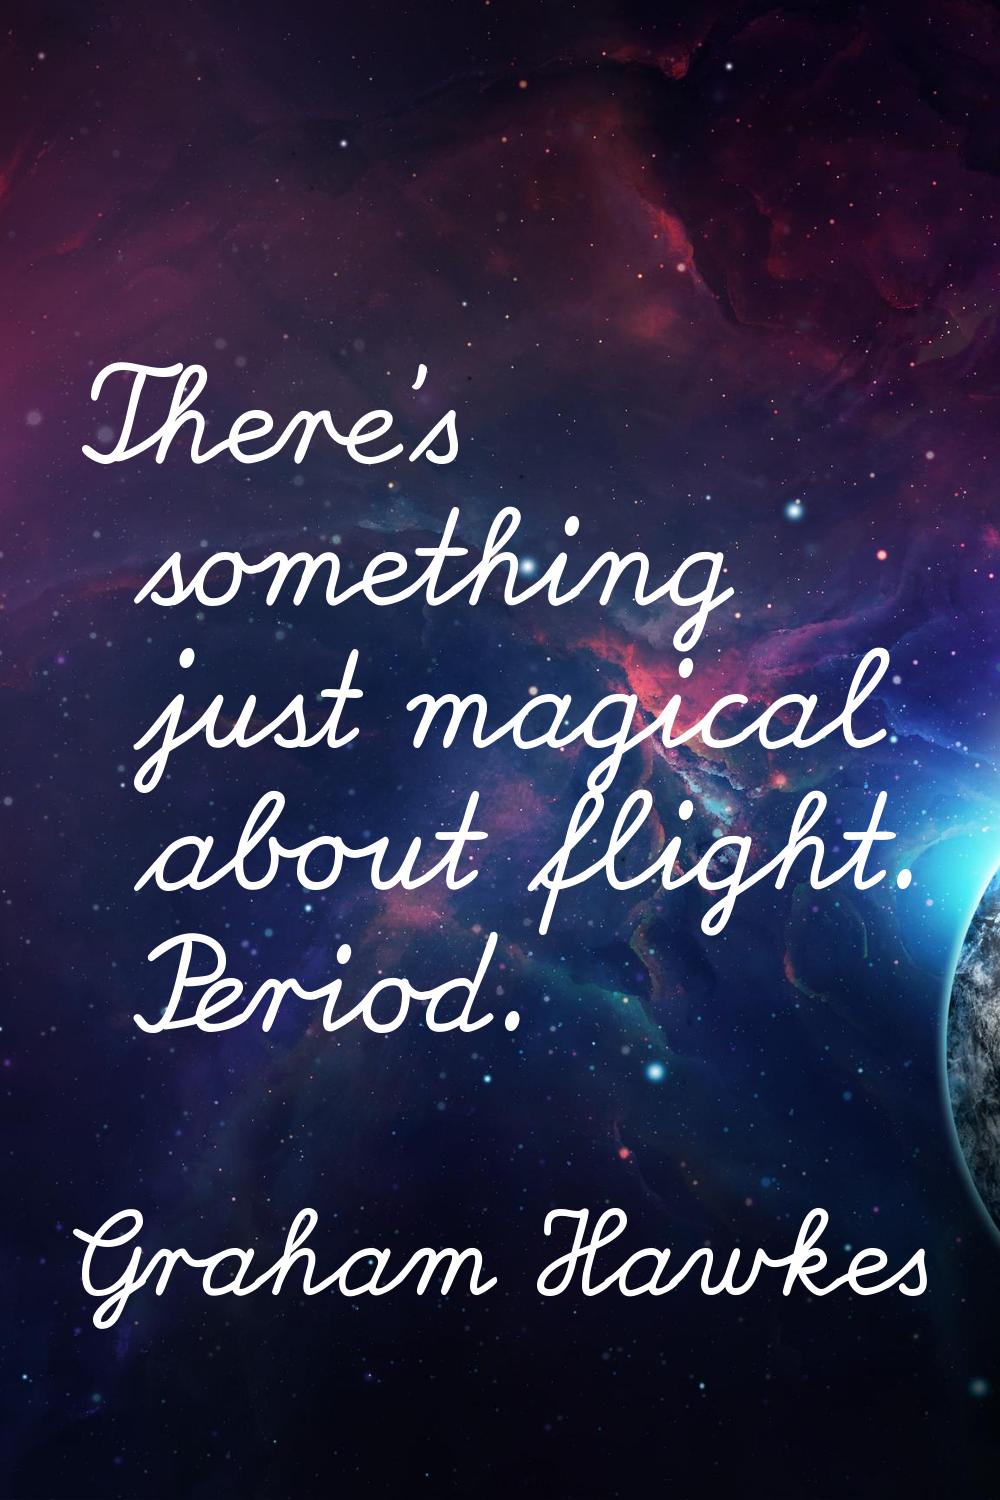 There's something just magical about flight. Period.